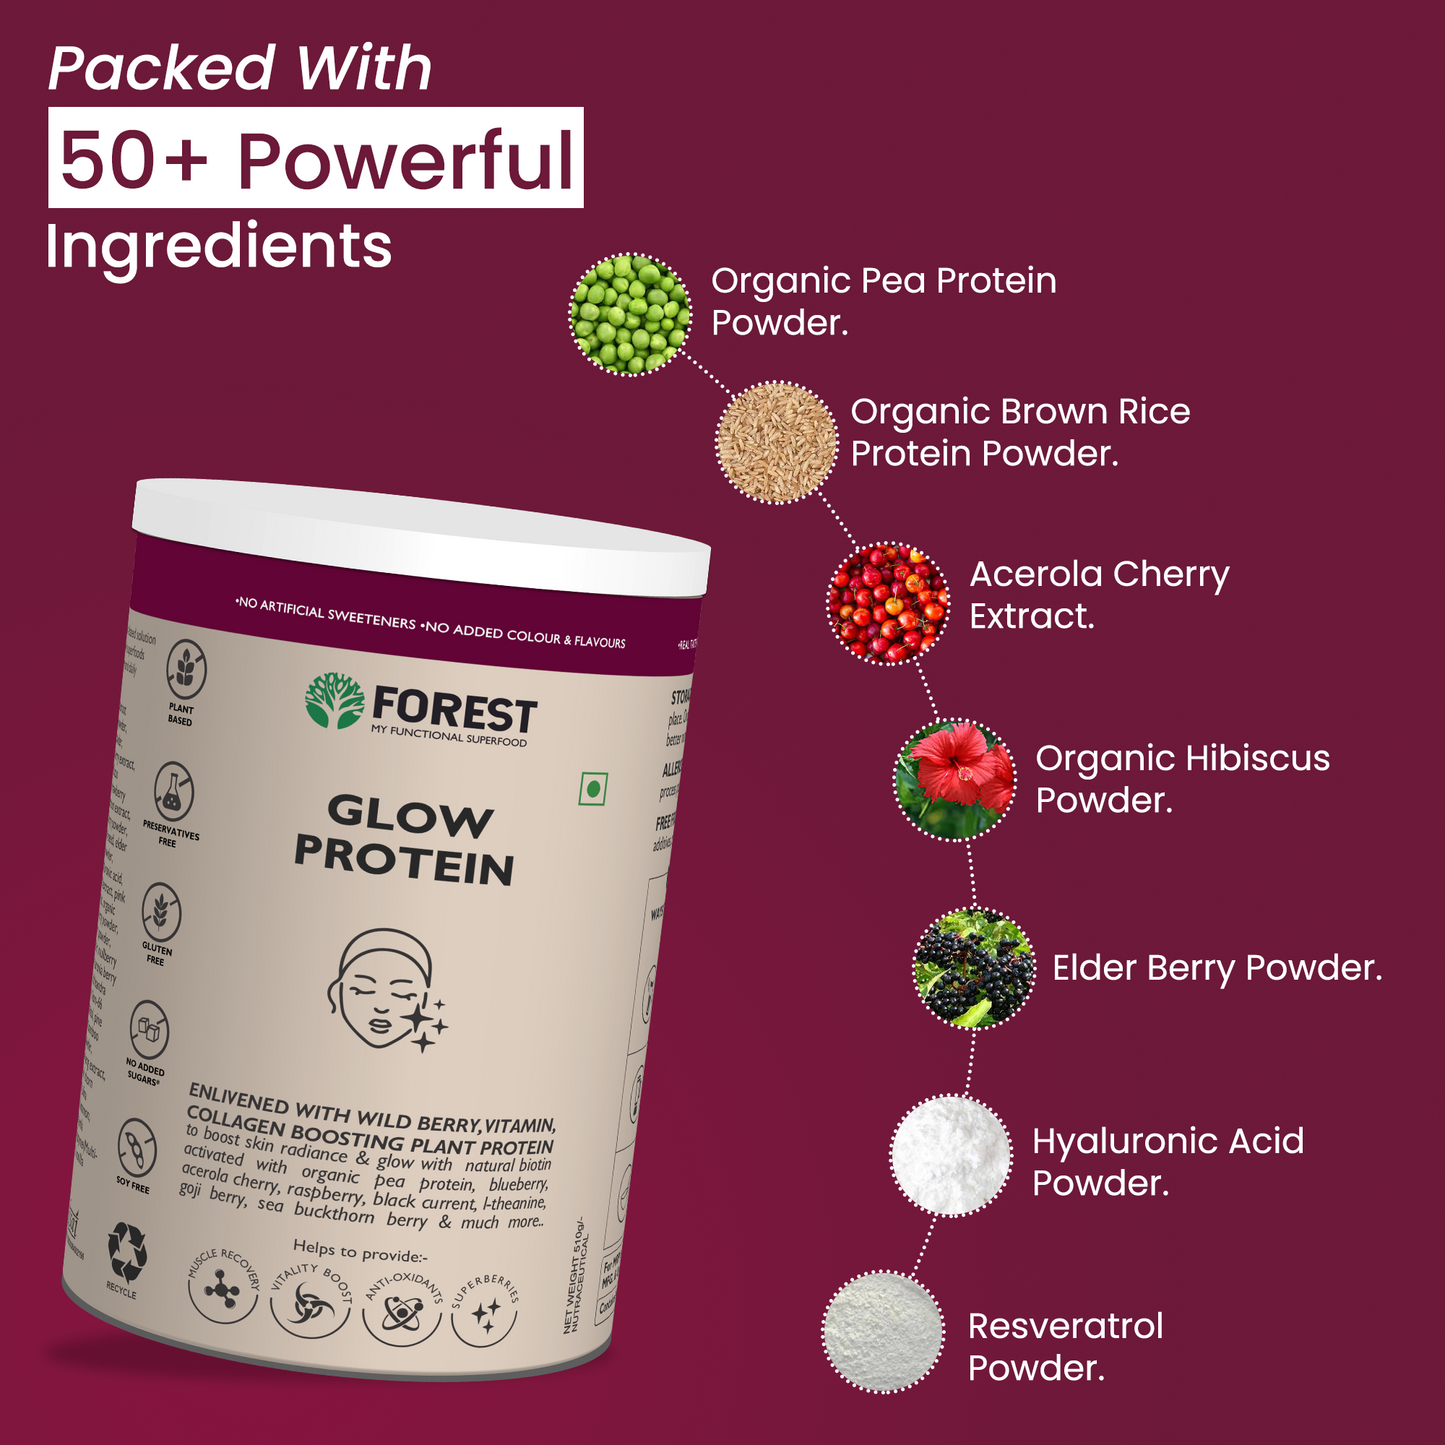 Forest Glow Protein For Collagen Boosting.